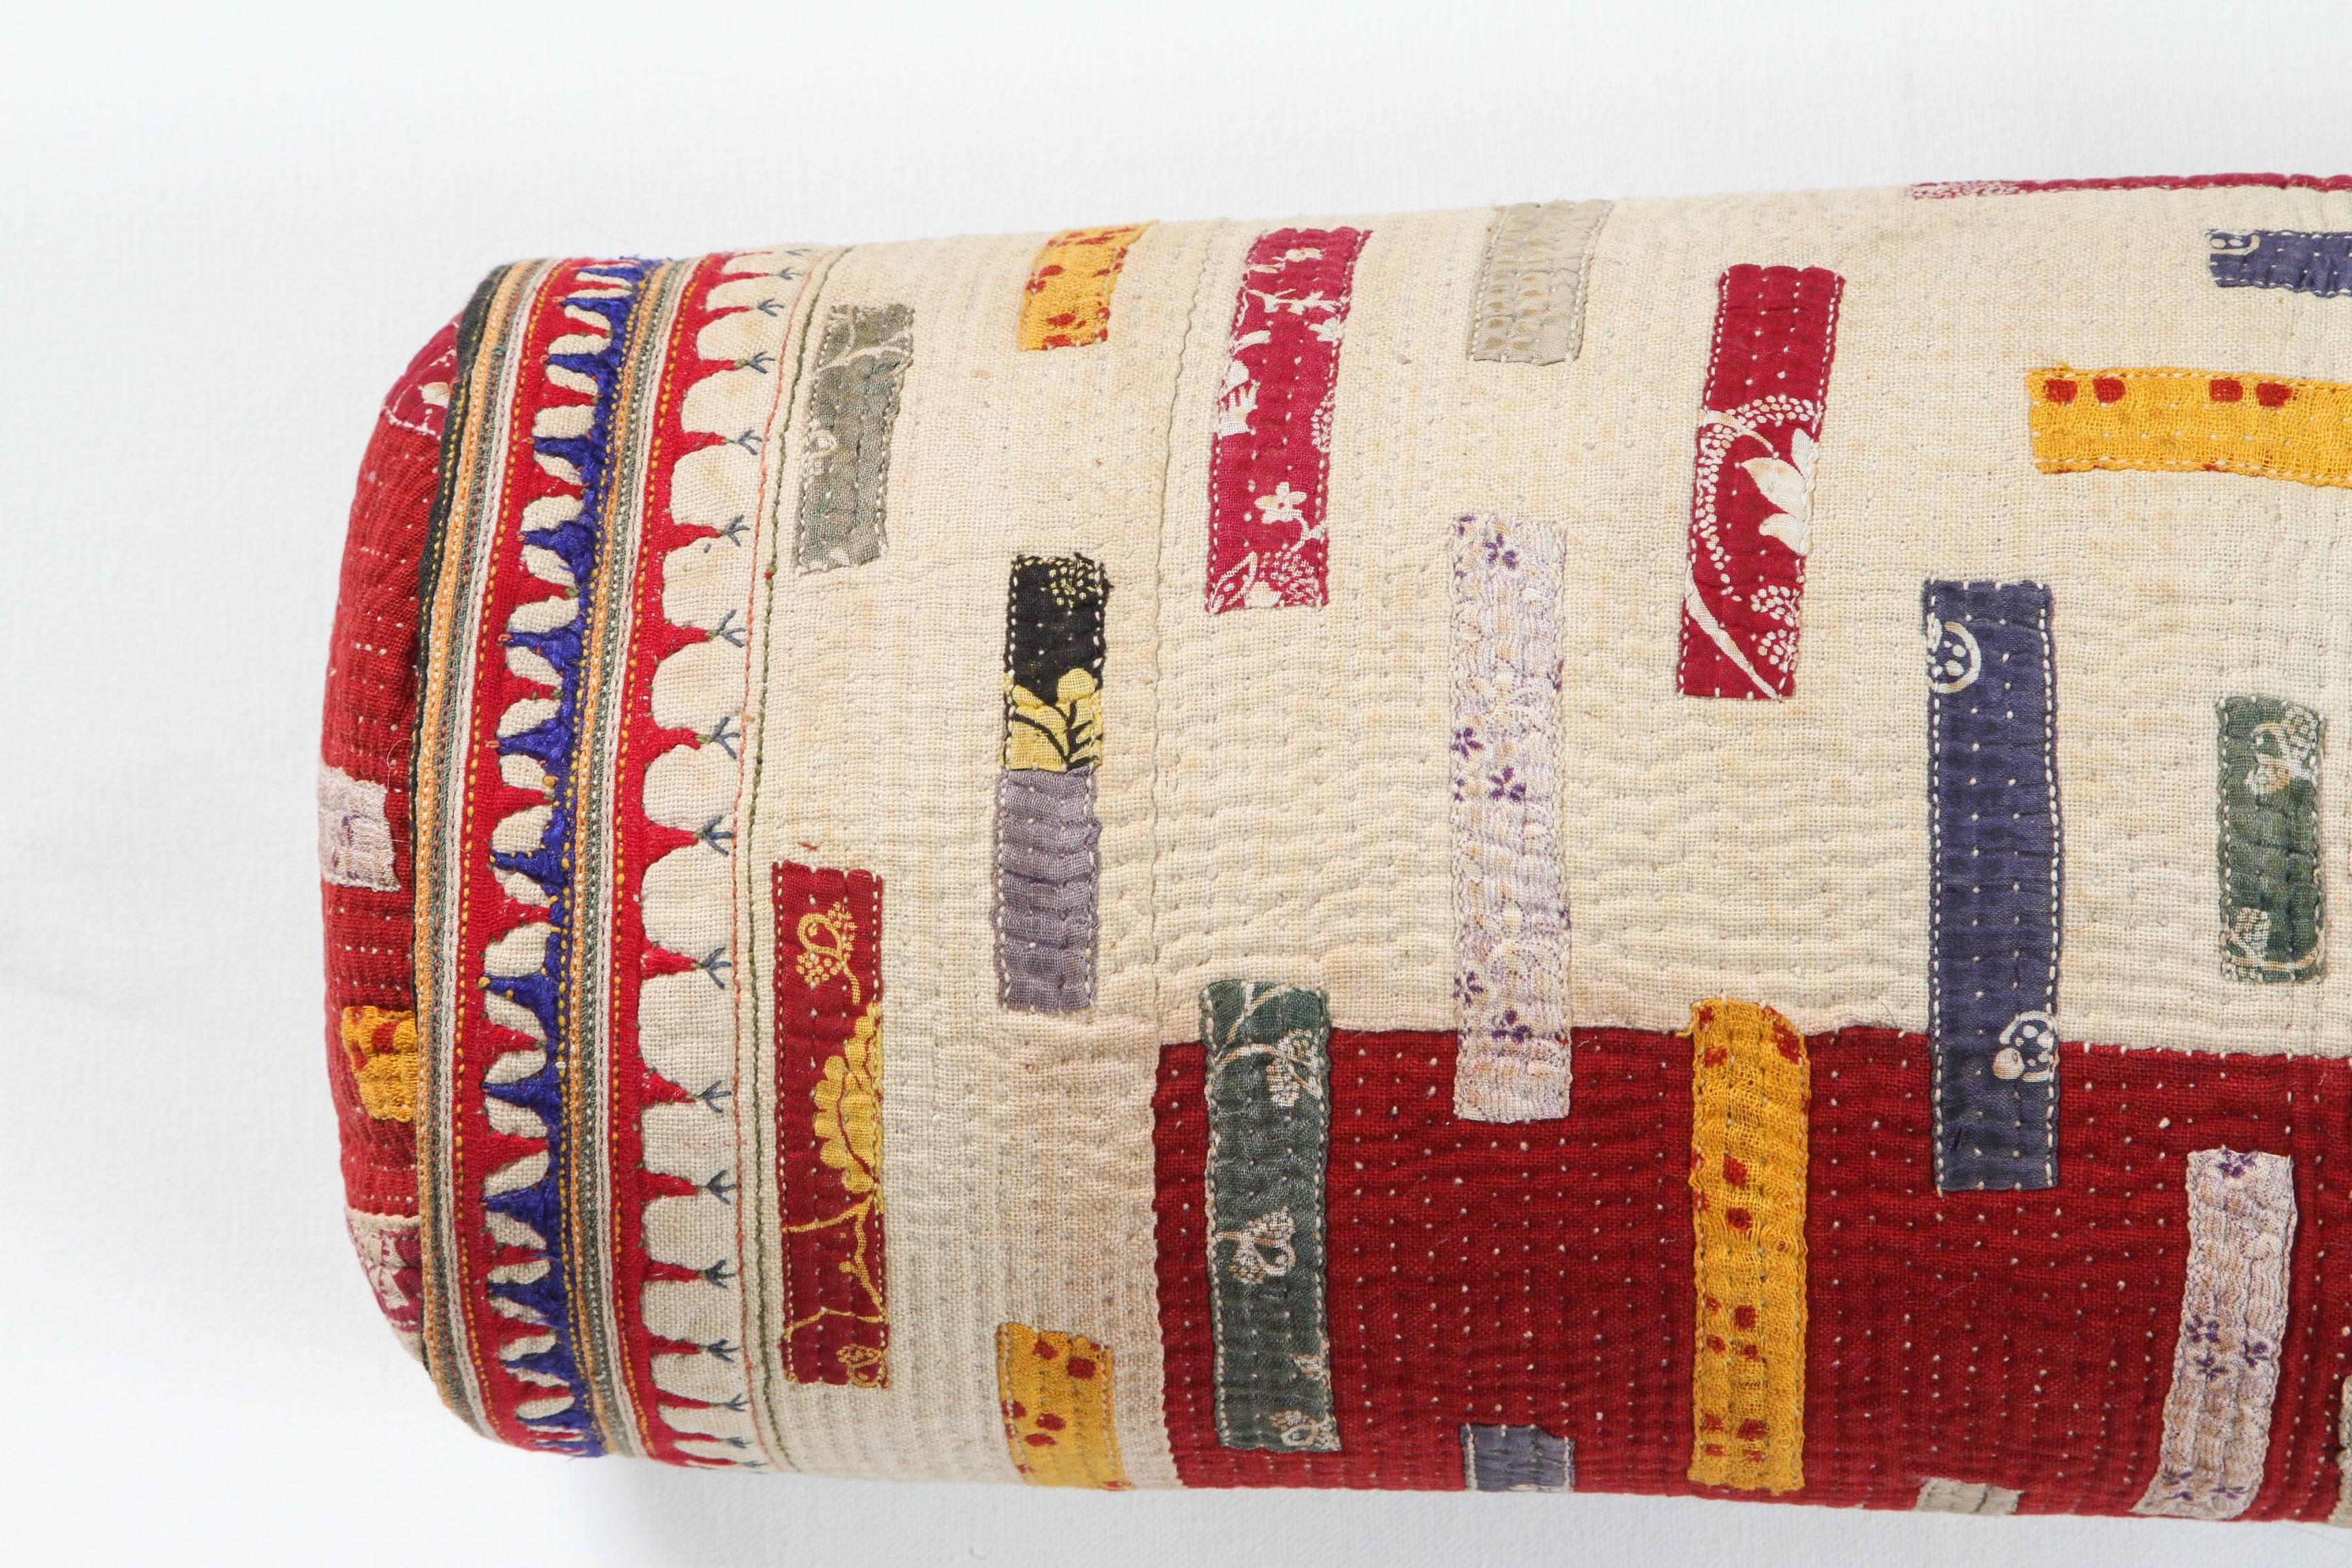 Bolster with zipper. Made from a vintage quilted and appliqued cotton wedding textile from Gujarat, Chaaron Tribal group. Feather and down fill.